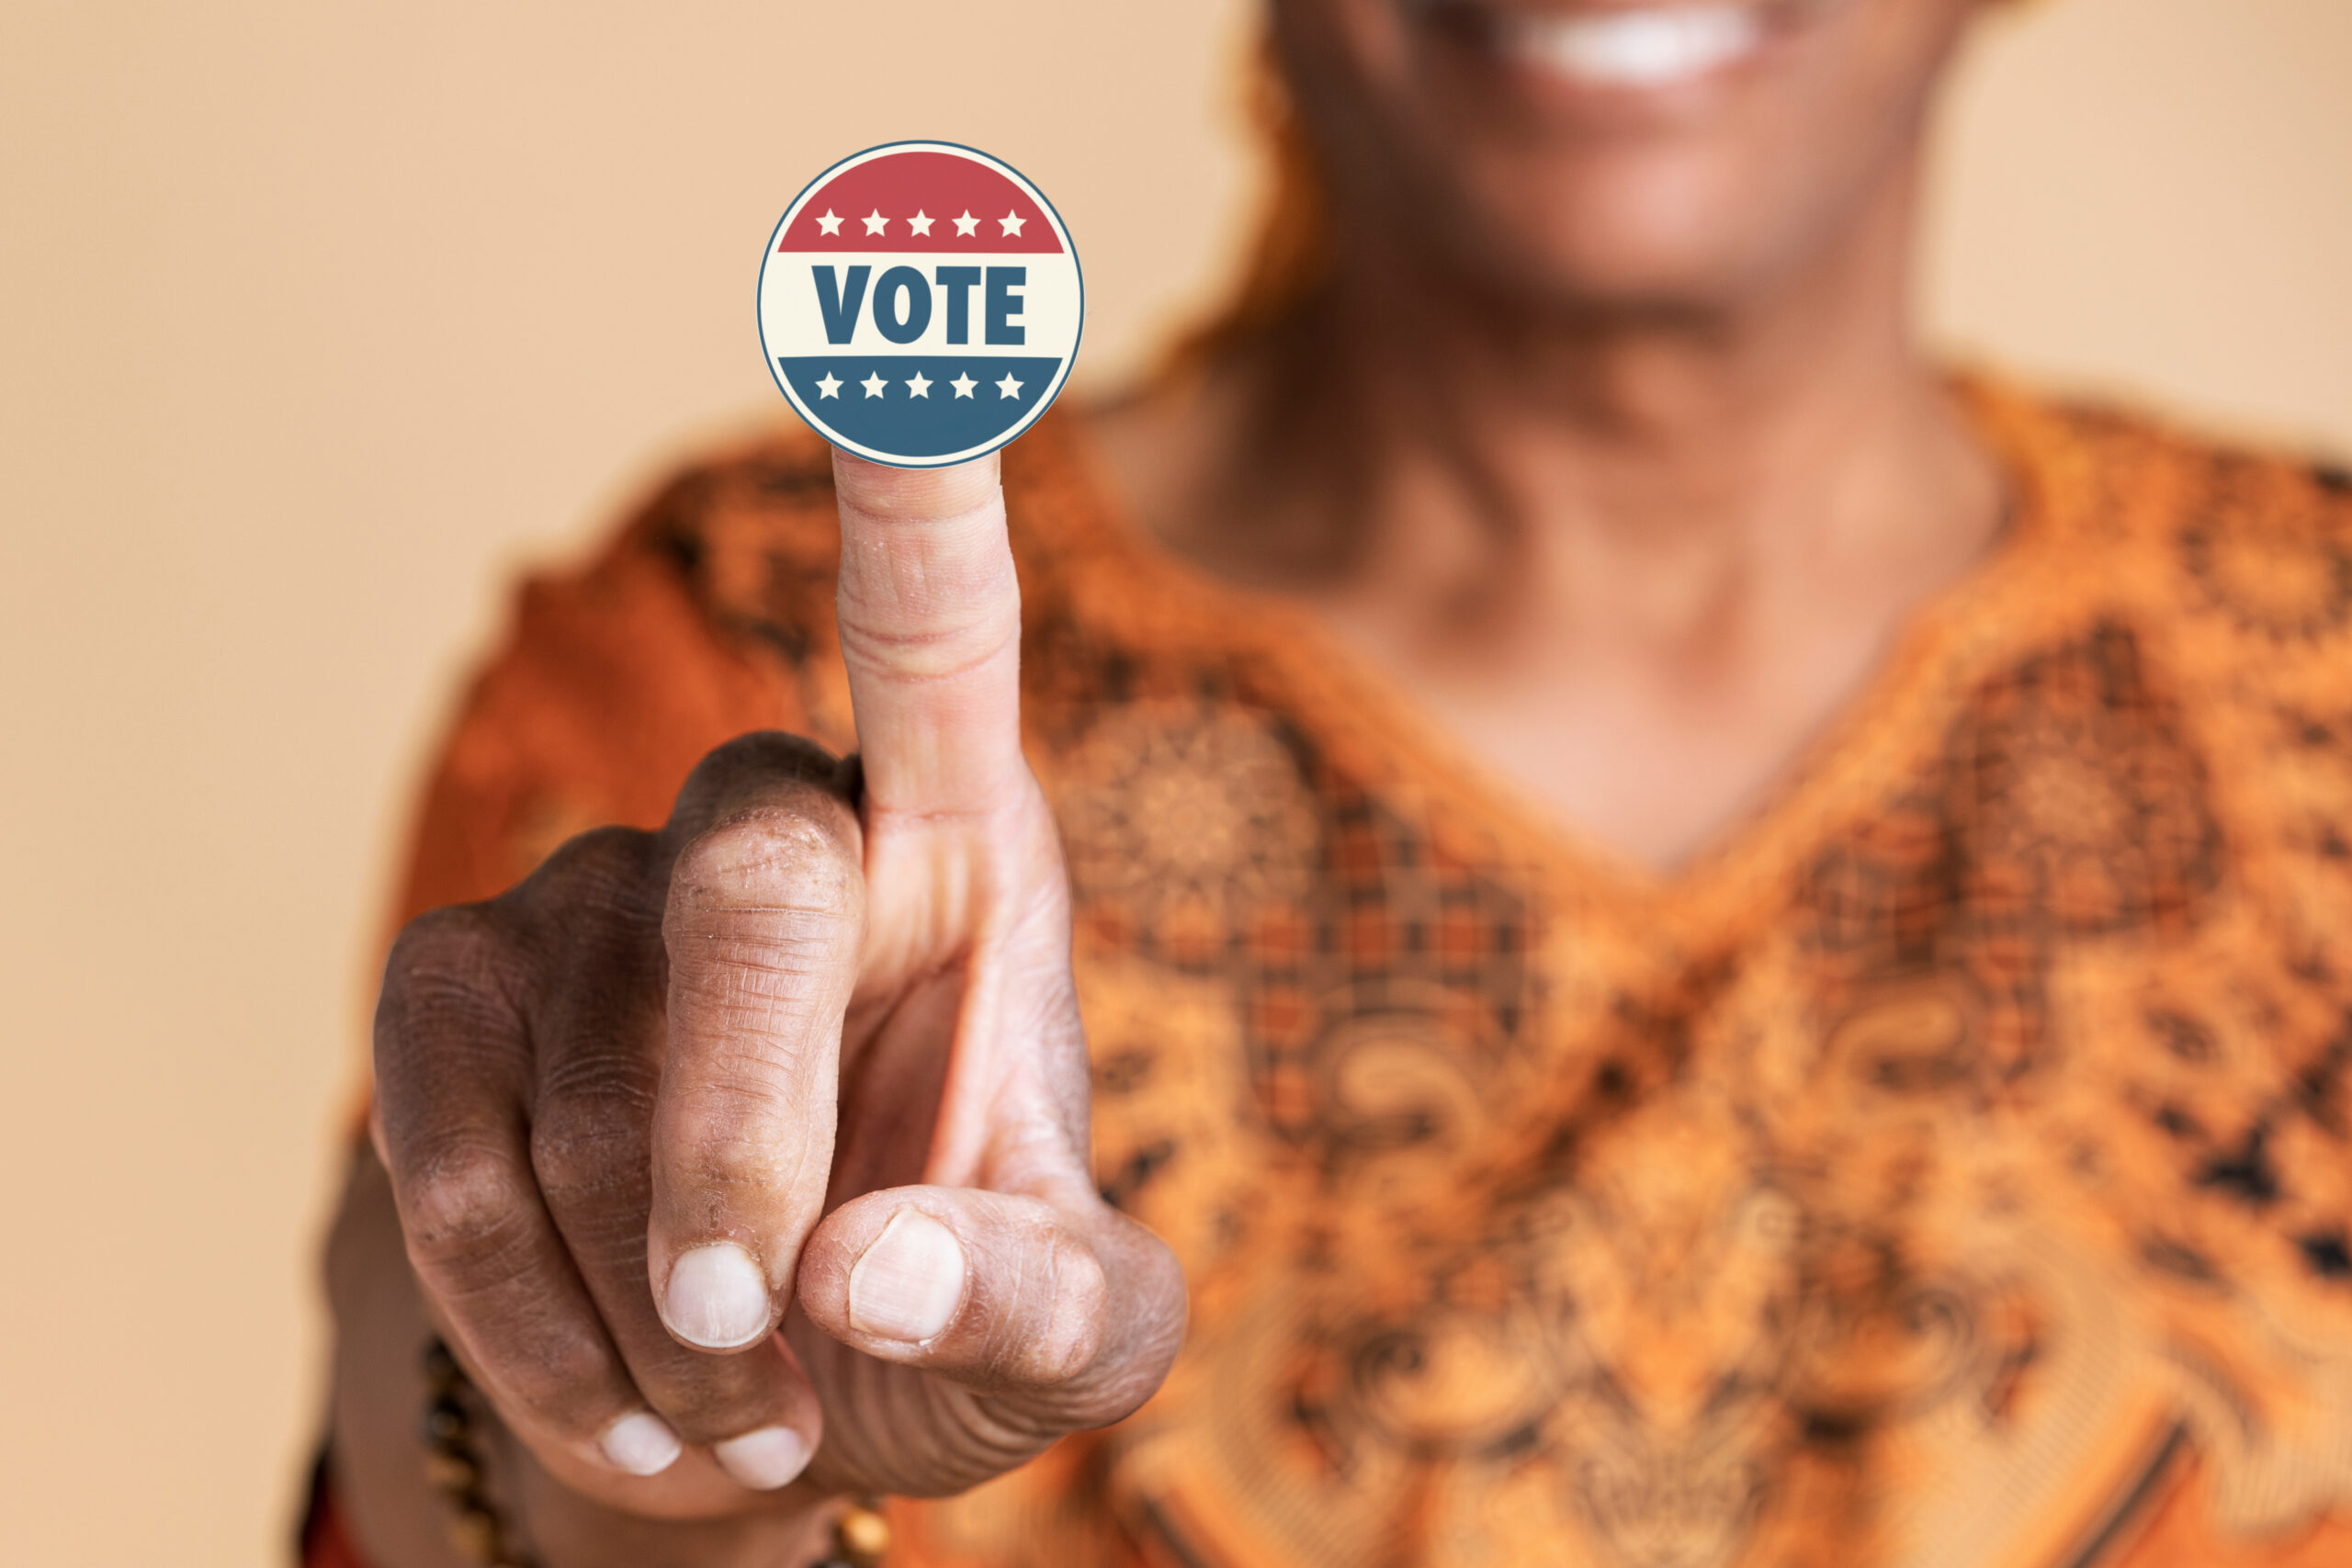 black woman smiling holding up a Vote sticker